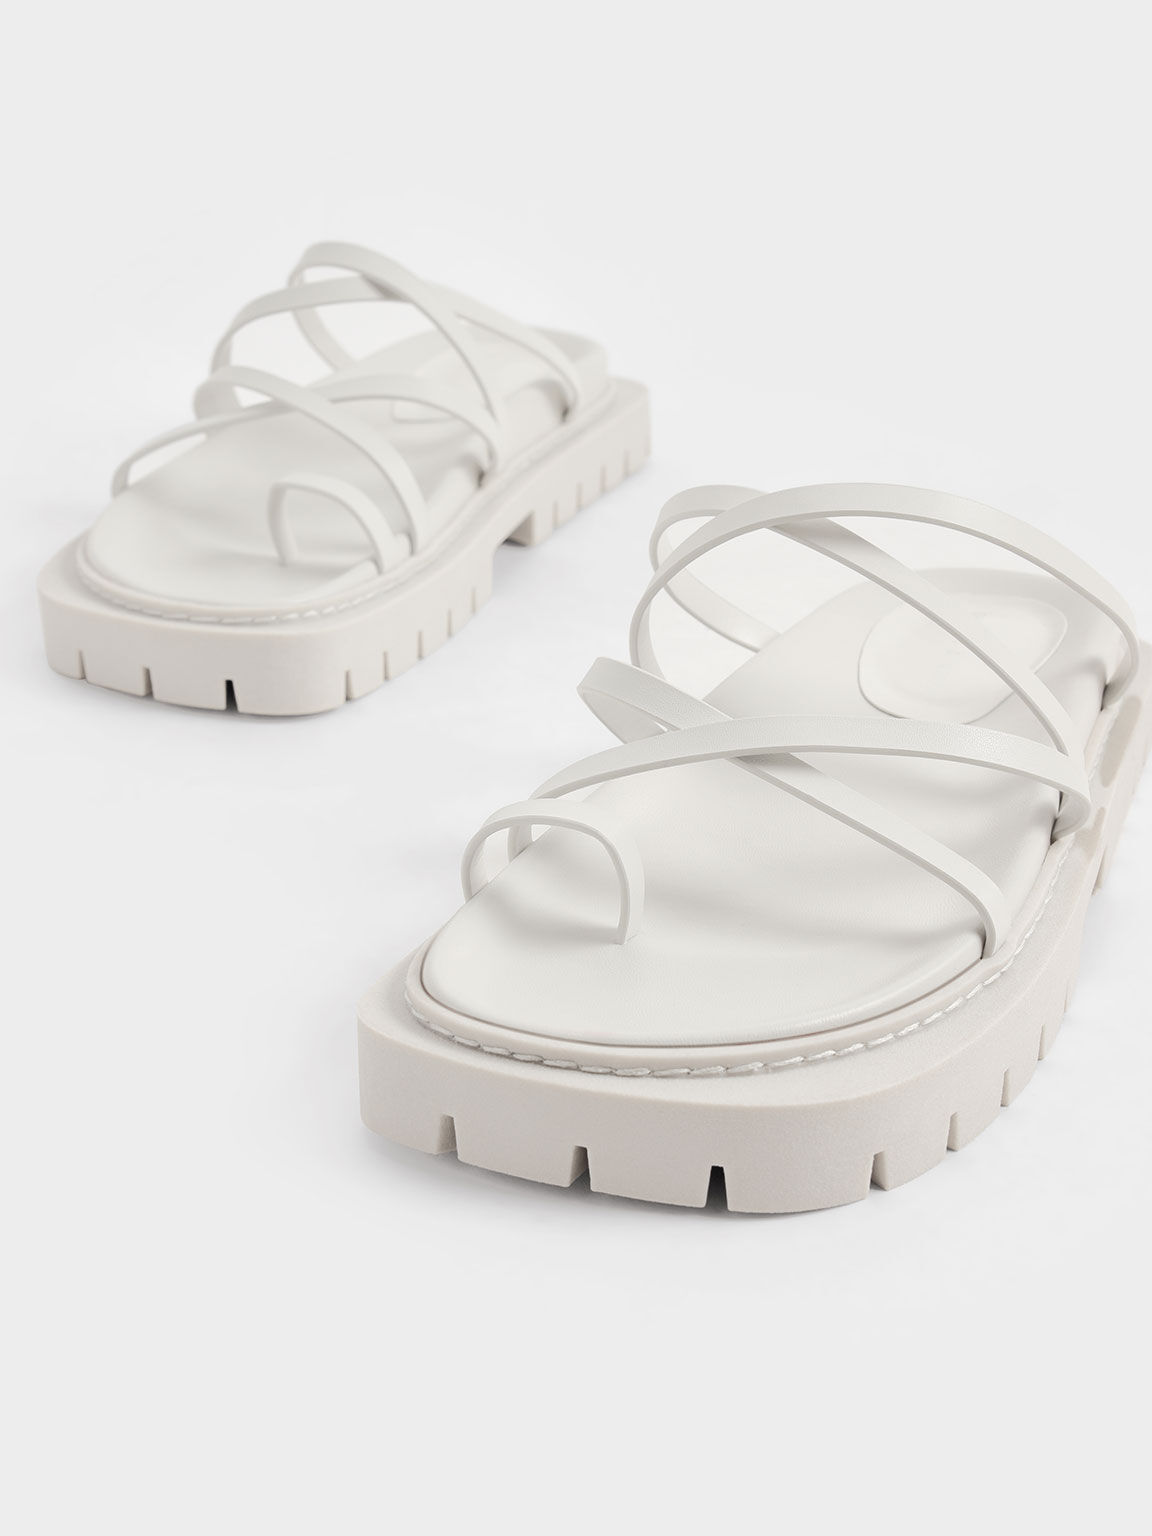 Strappy Cleated Sole Sandals, White, hi-res